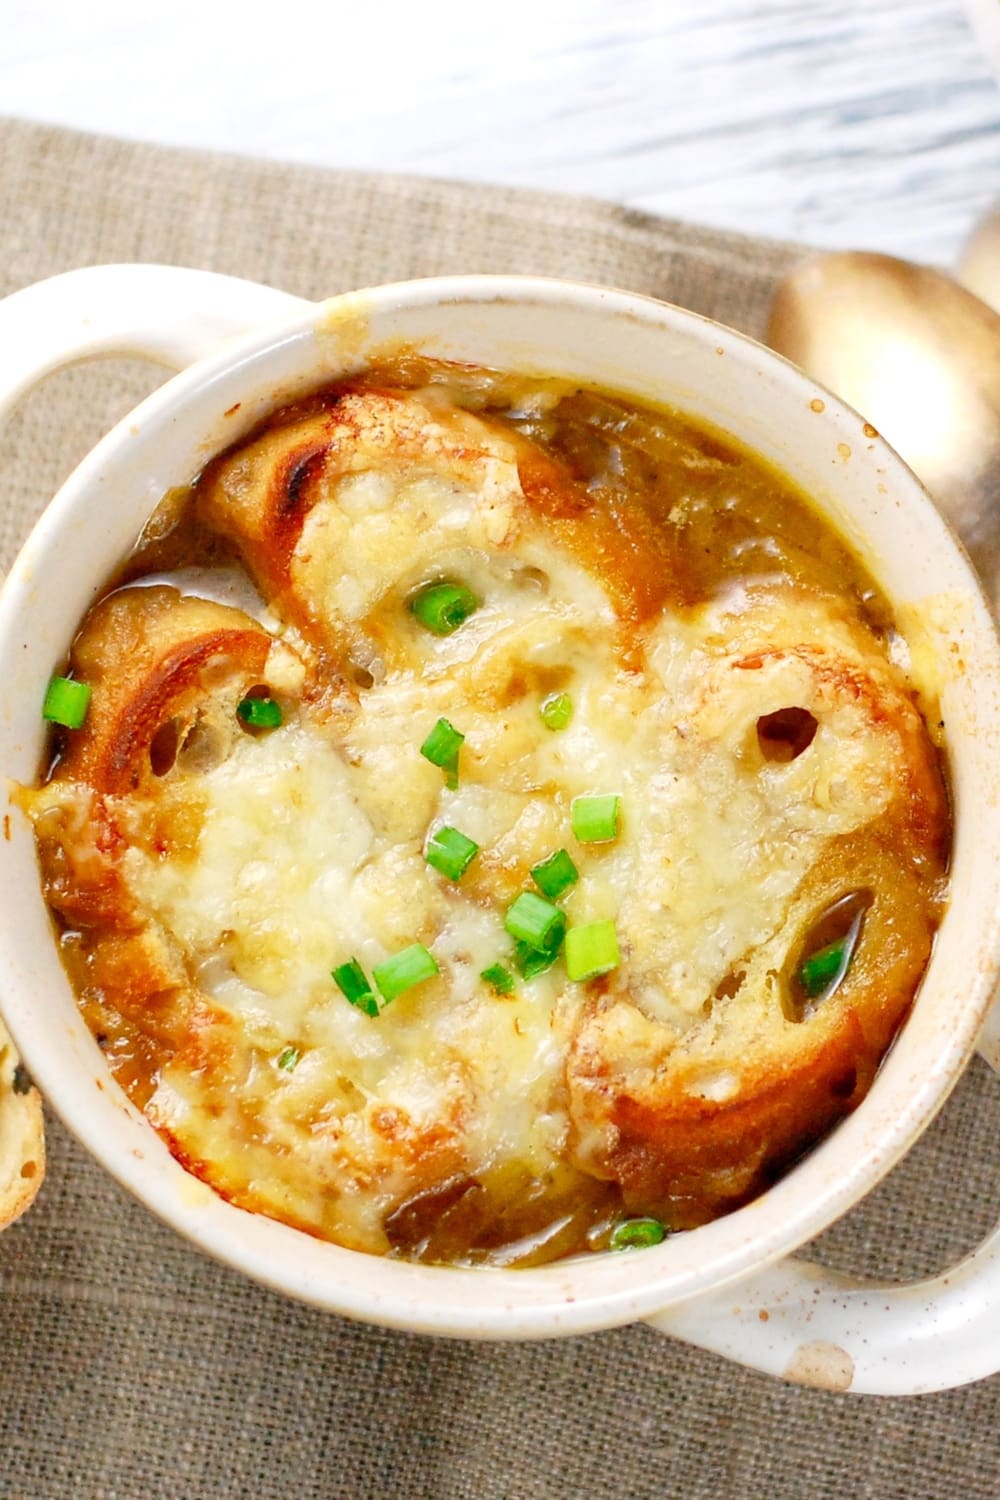 Bowl of Homemade French Onion Soup